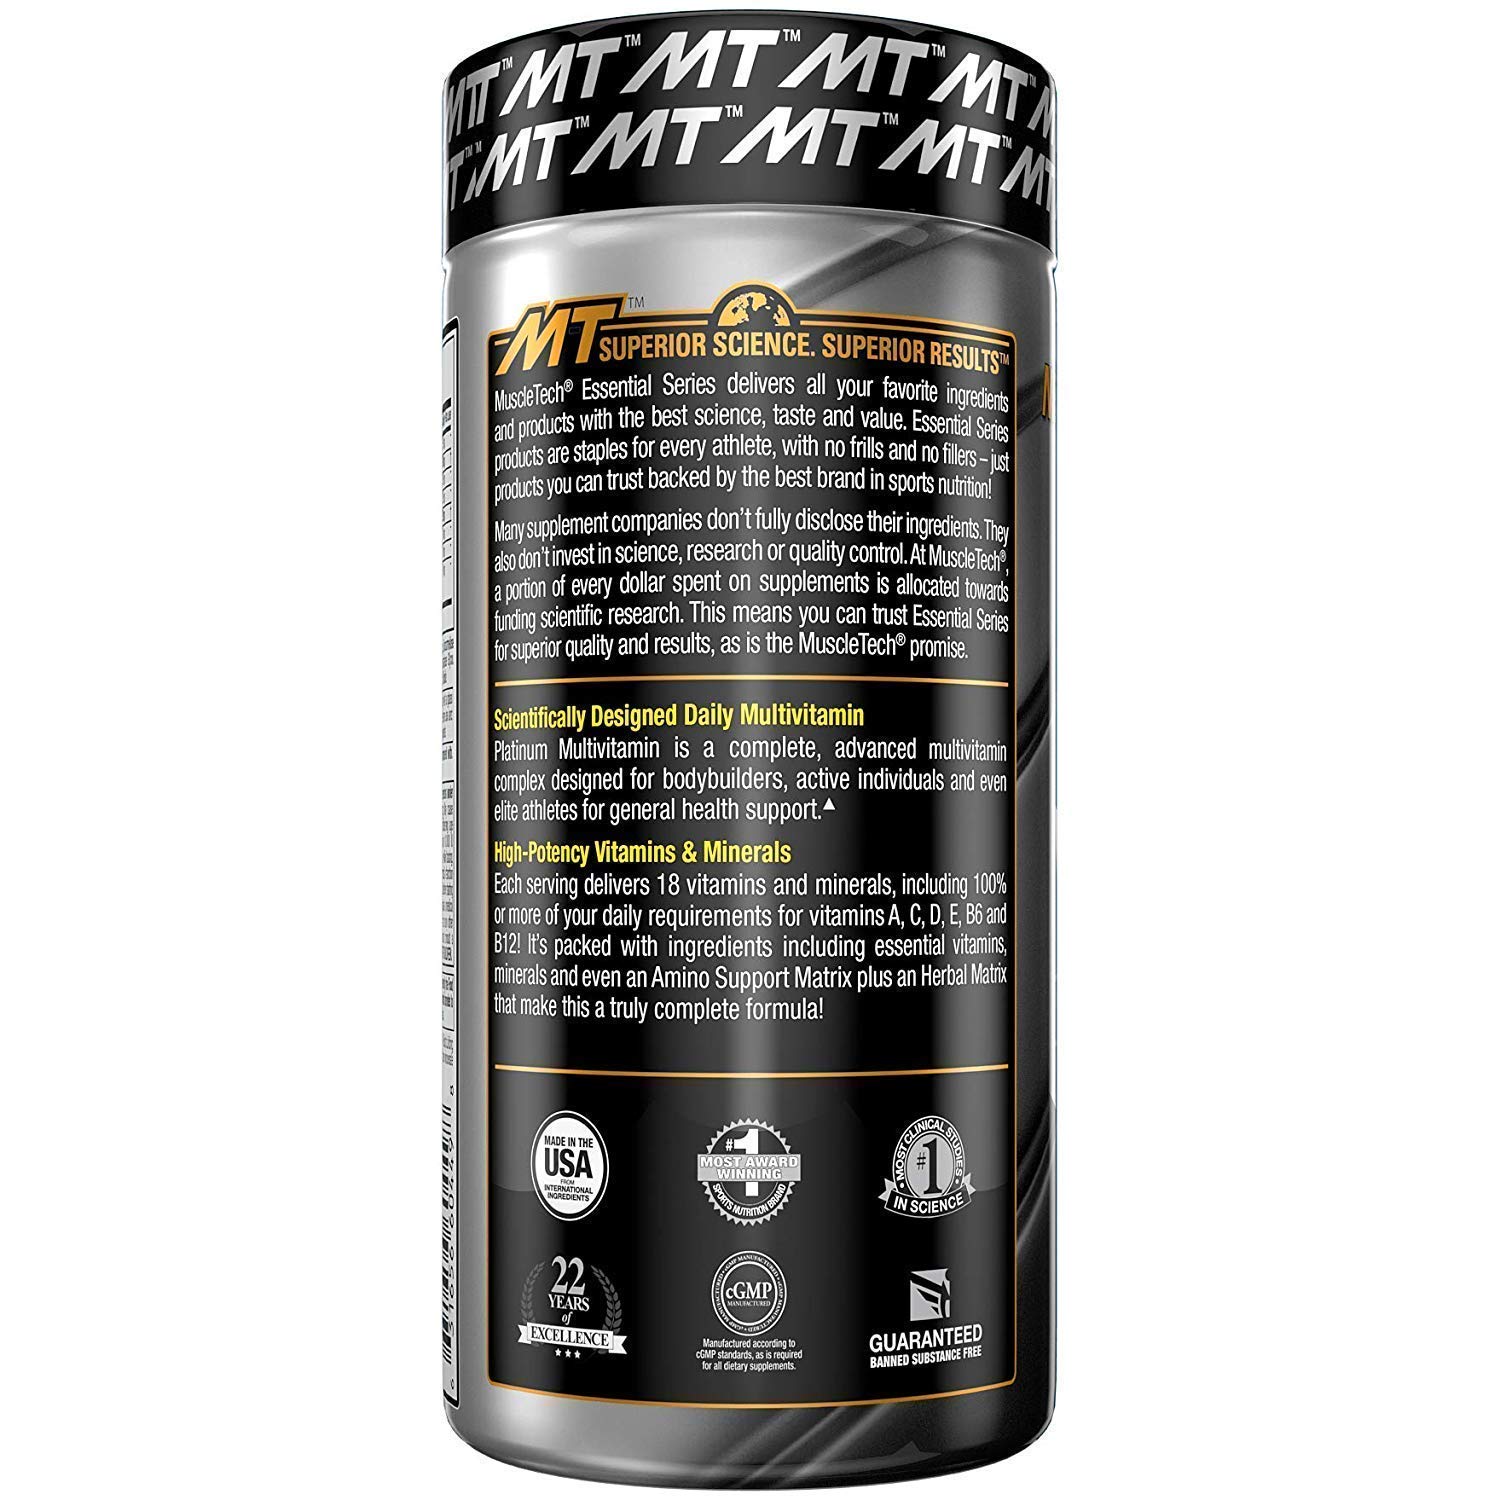 MuscleTech Creatine Monohydrate Powder Platinum Pure Micronized Muscle Recovery + Builder & Platinum Multivitamin for Immune Support 18 Vitamins & Minerals